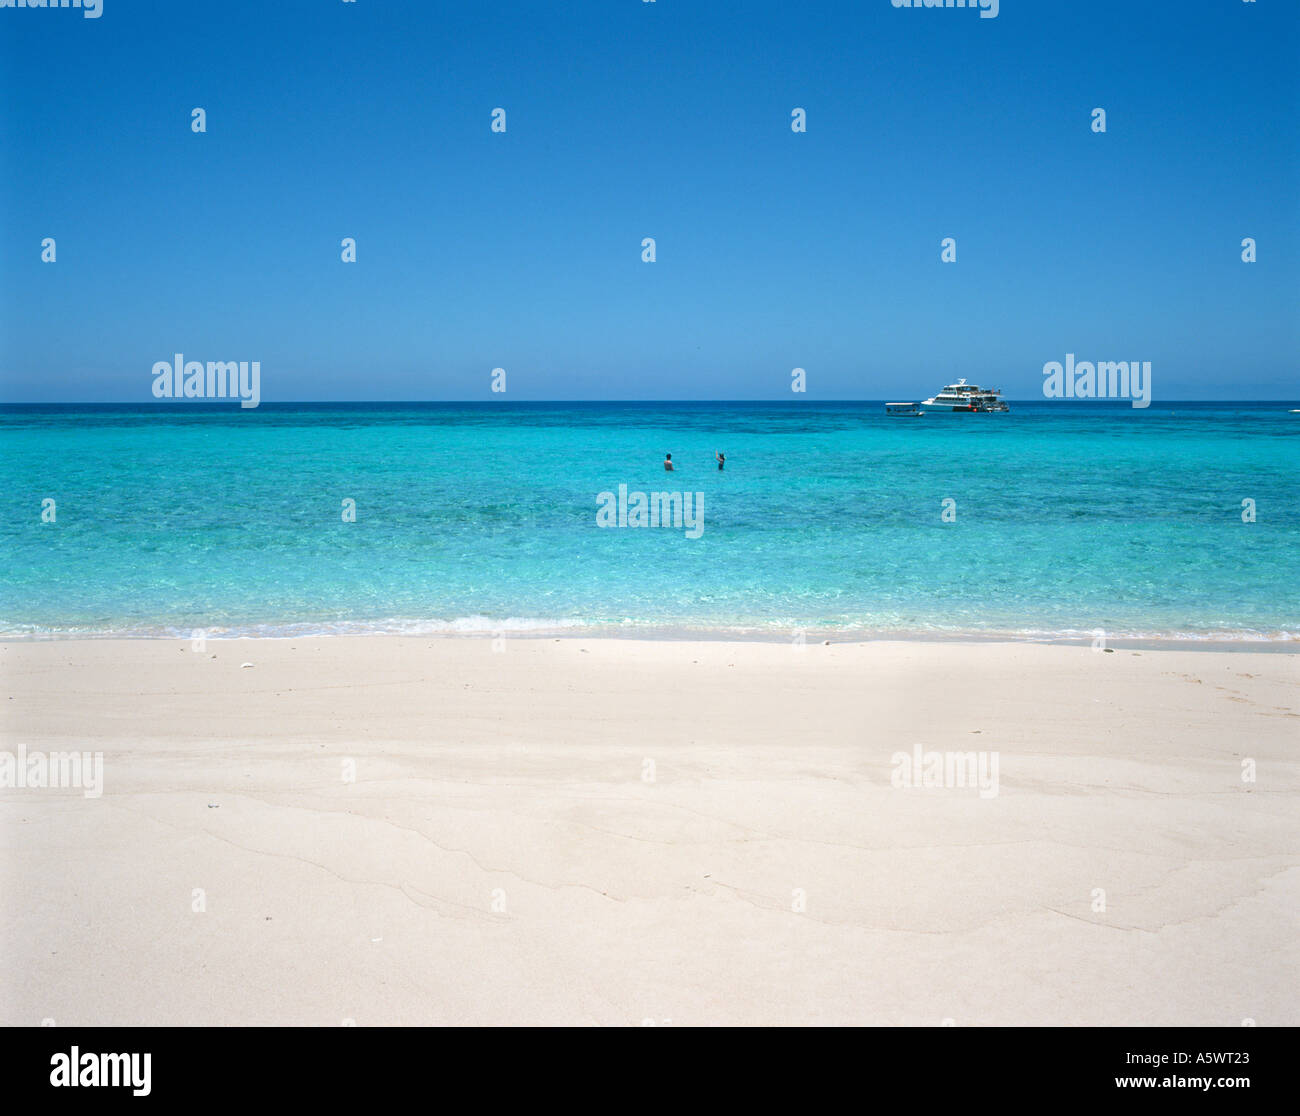 Sandbank with excursion boat in distance, Great Barrier Reef, Cairns, North Queensland, Australia Stock Photo